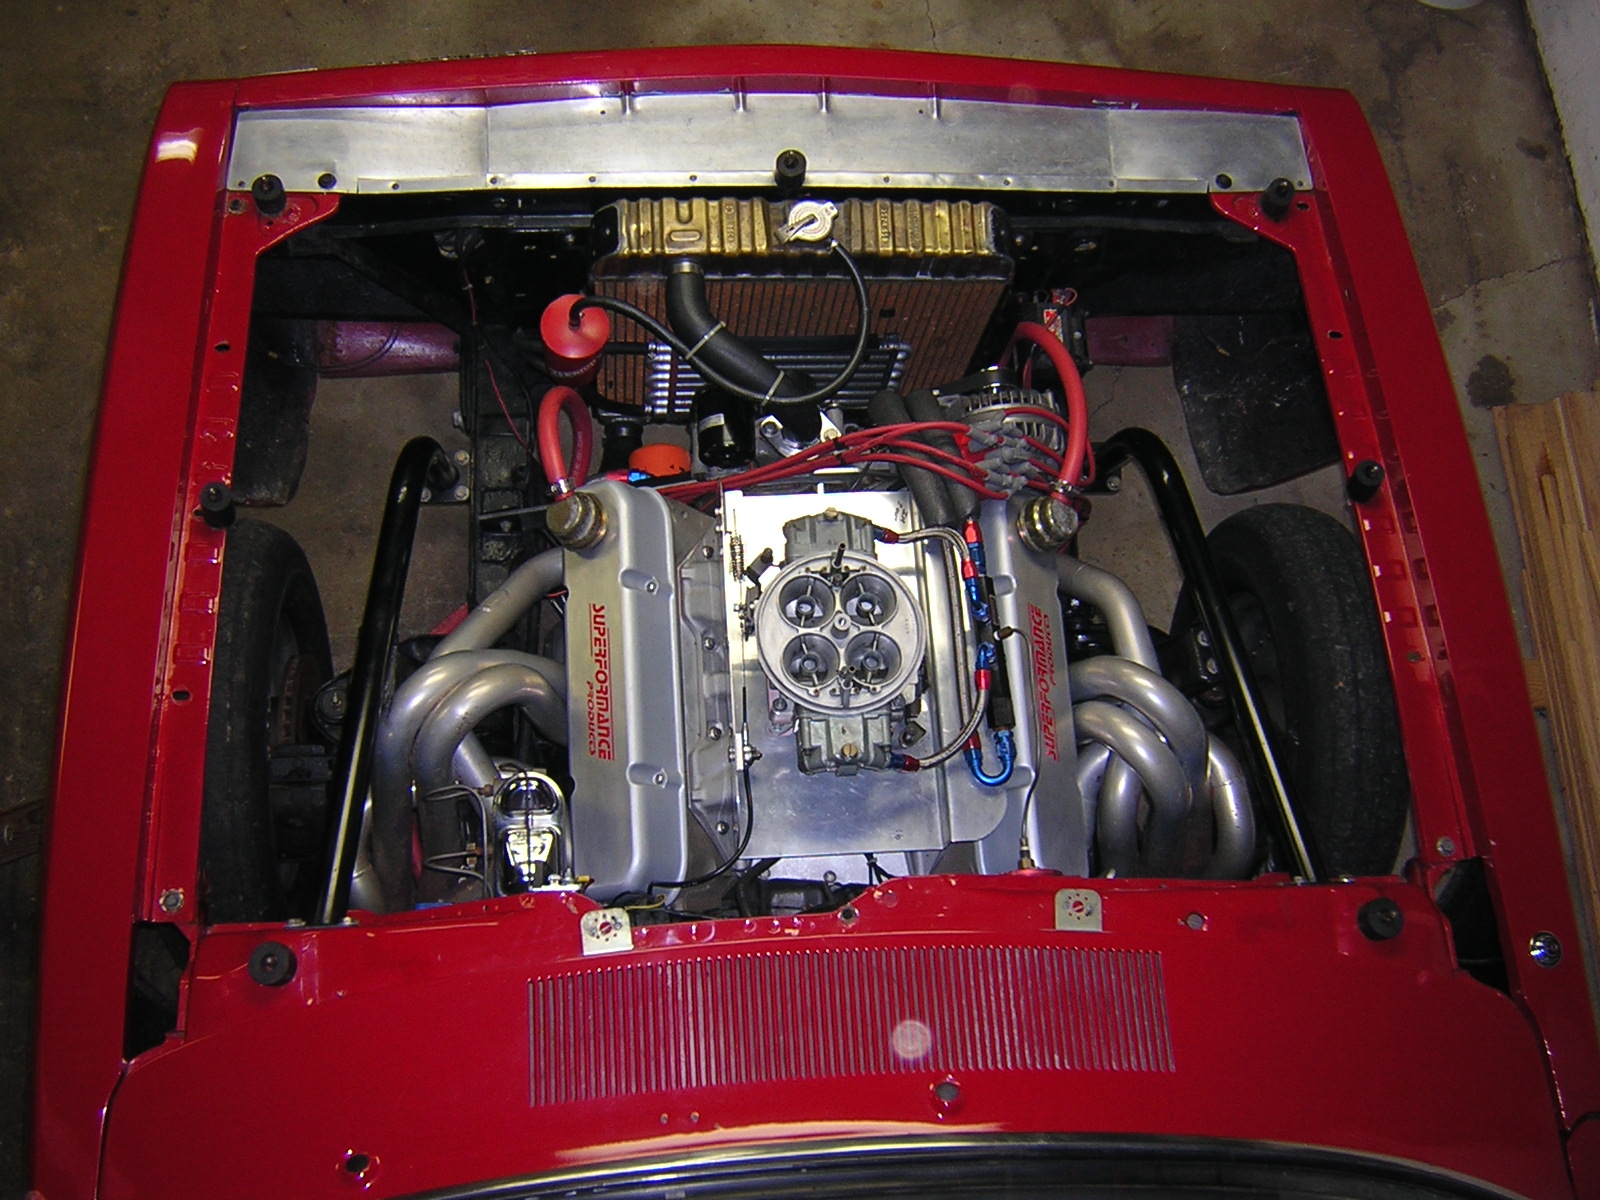 Attached picture 6398811-EnginePics002compressed.jpg